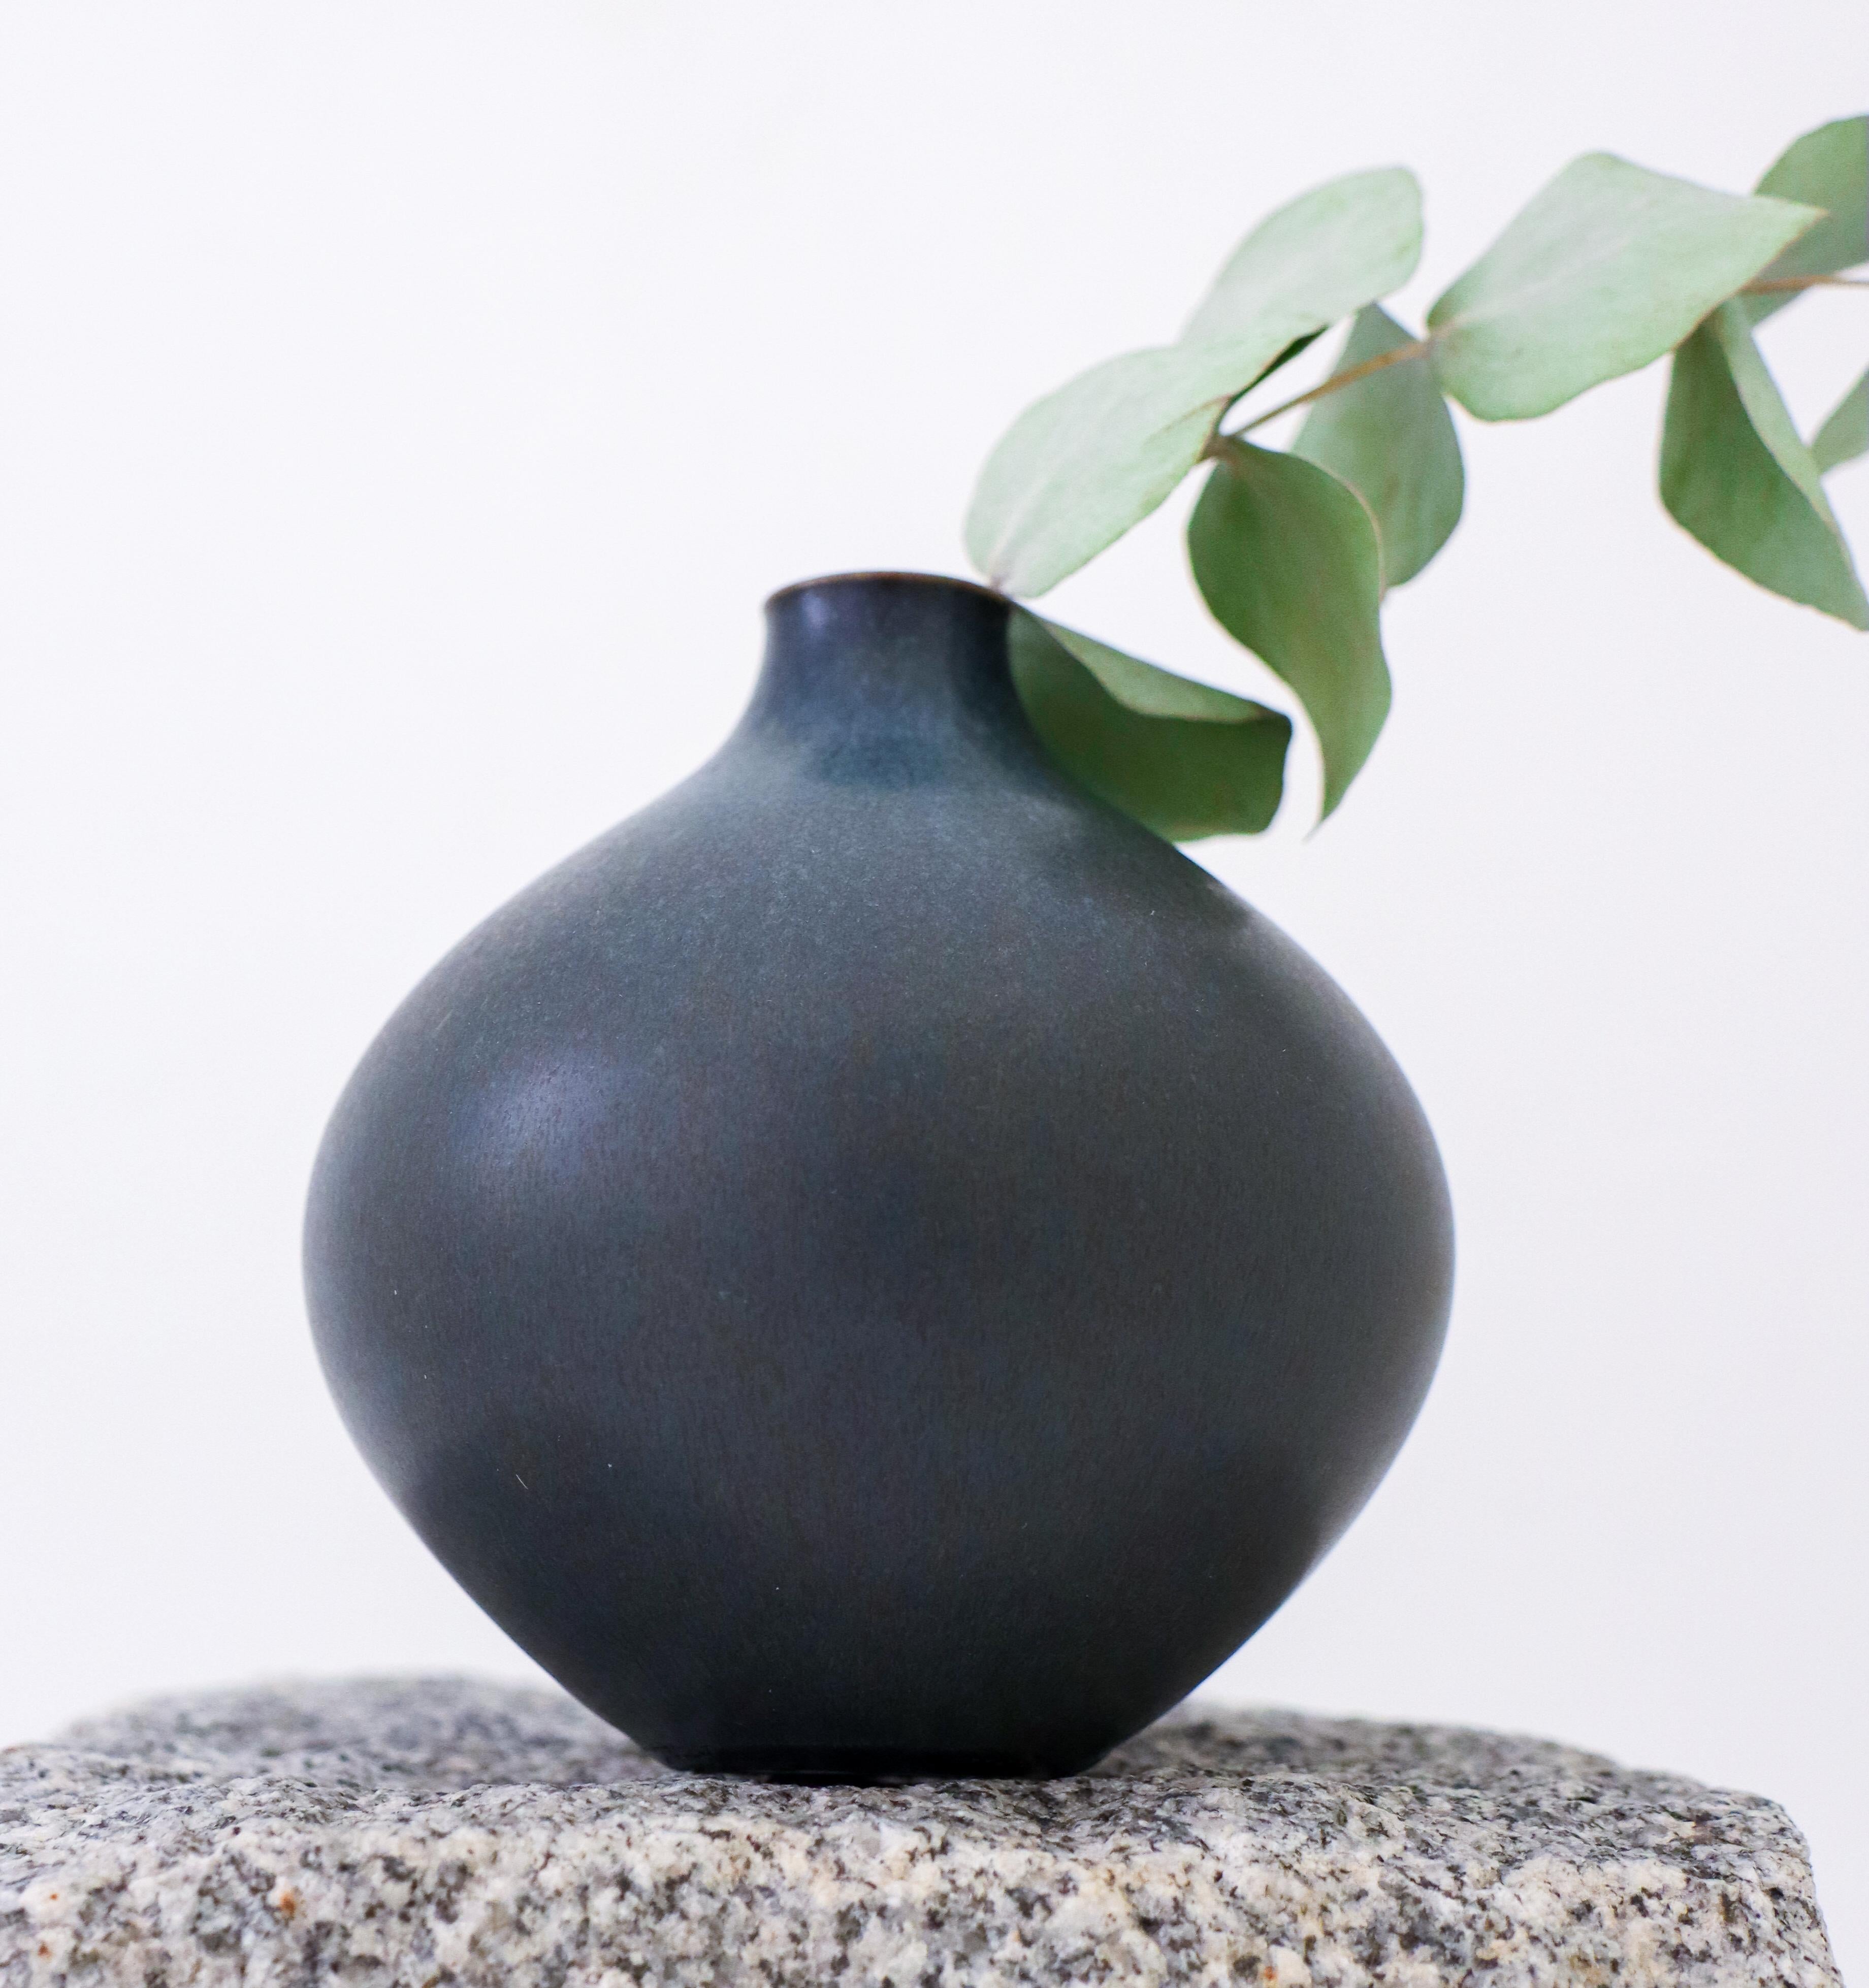 A blue stoneware vase with a lovely har fur glaze designed by Stig Lindberg at Gustavsberg. The vase is 11 cm high and 11 cm in diameter. It is in excellent condition and marked as on photos. This is a uniques vase designed at the Gustavsberg Studio